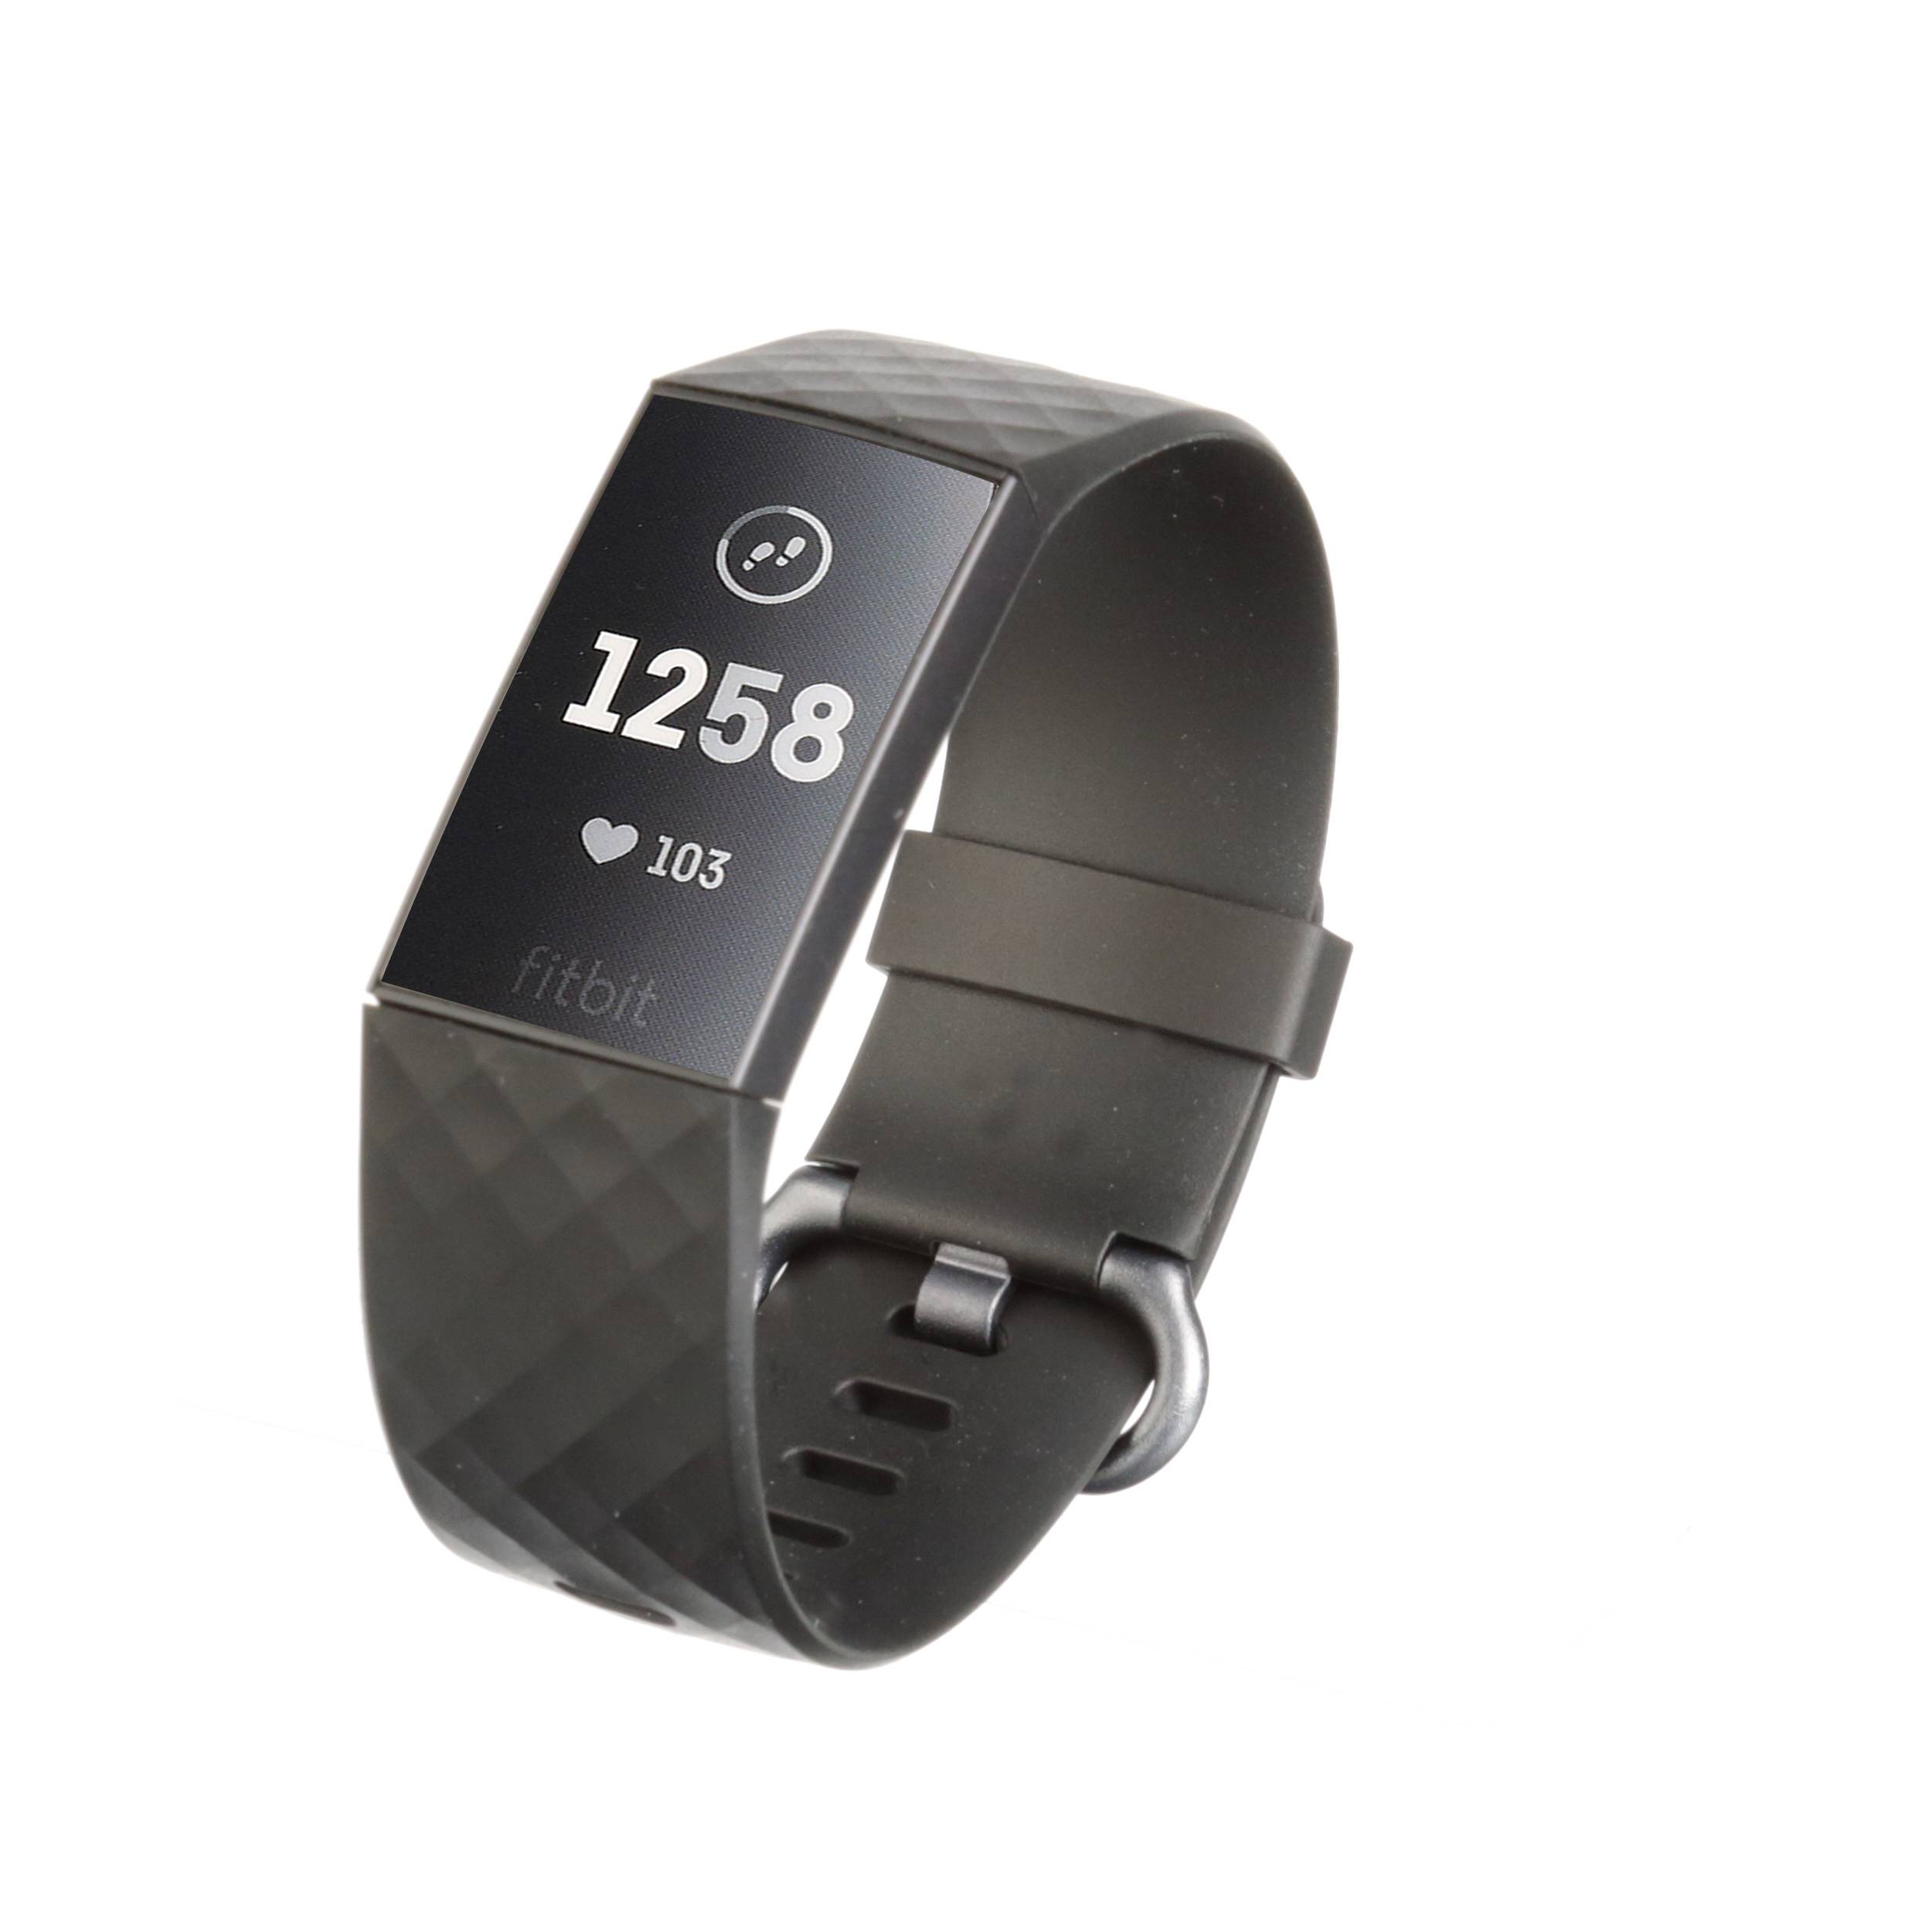 walmart fitbit charge 3 special edition